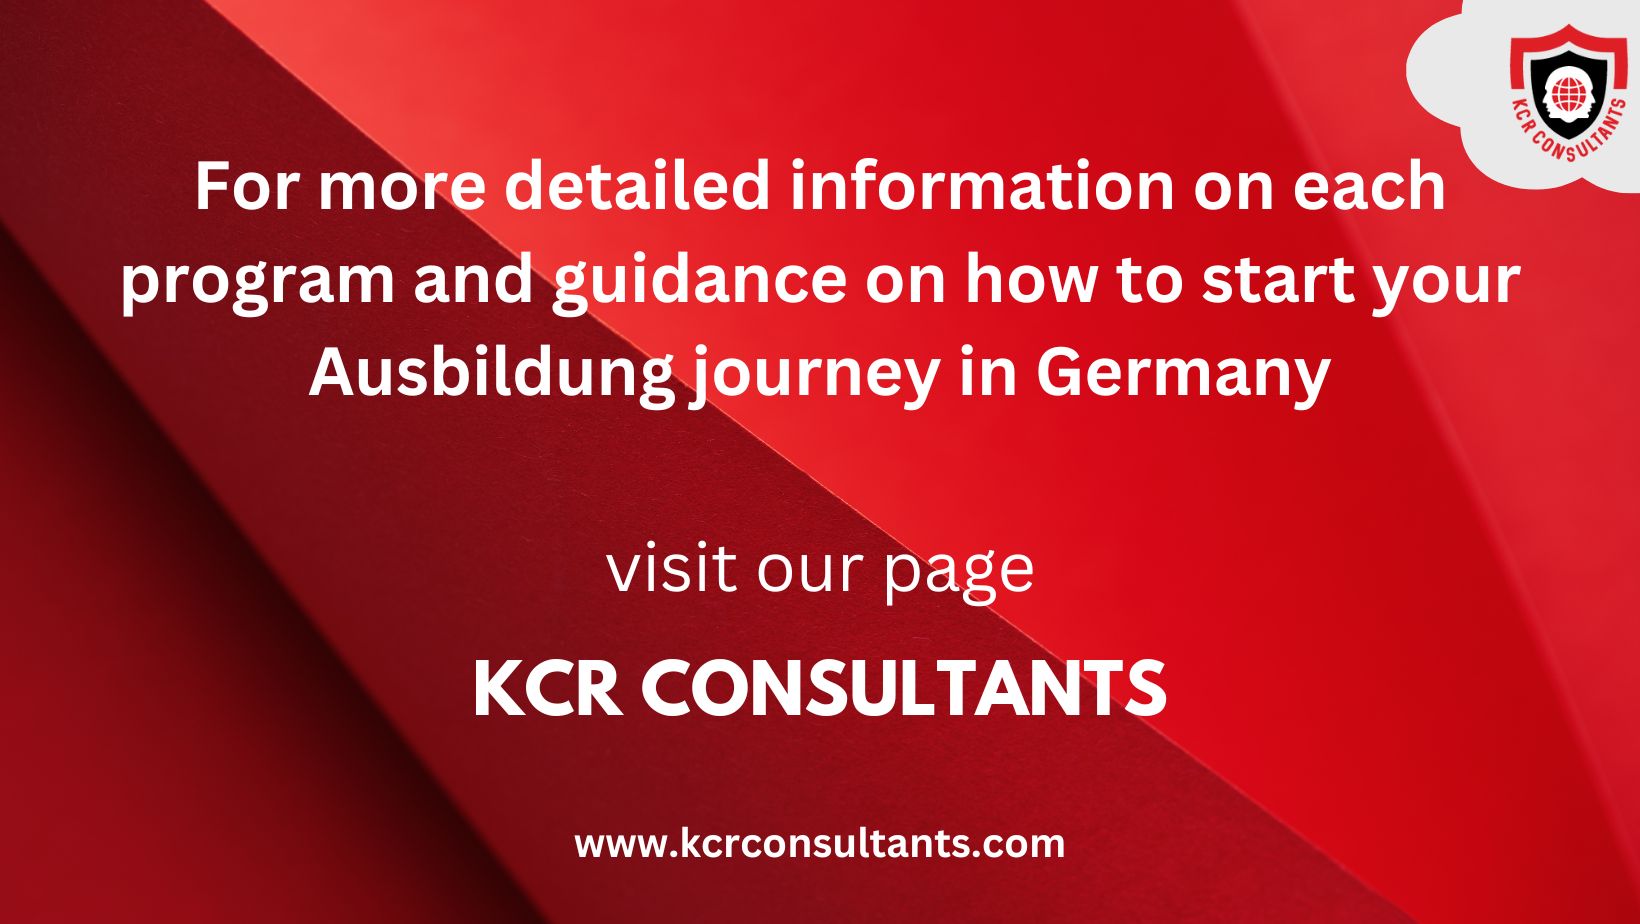 The best Ausbildung Programs in Germany - KCR CONSULTANTS - Contact us